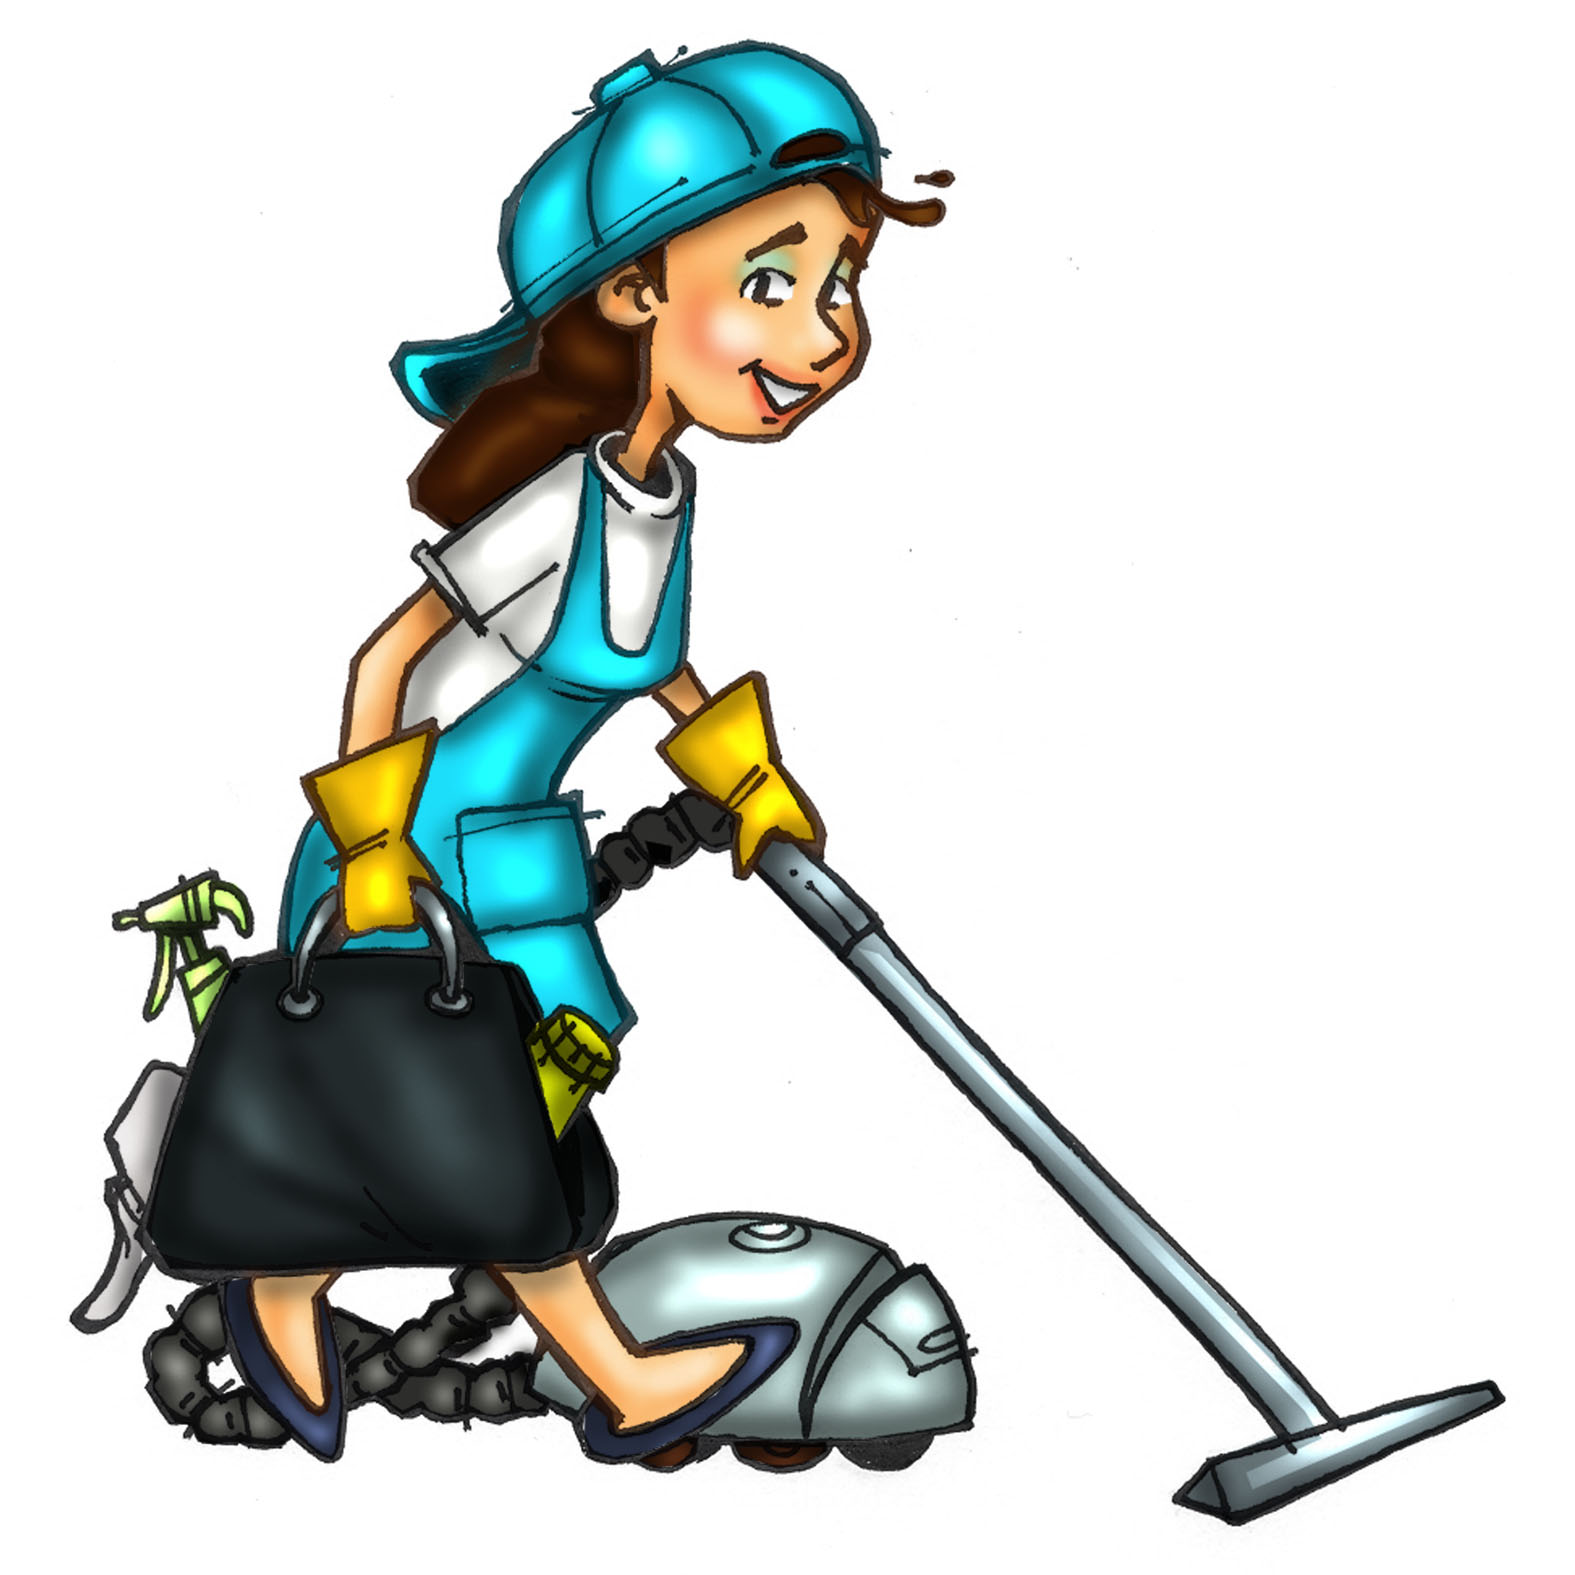 Cleaning And Painting Clipart